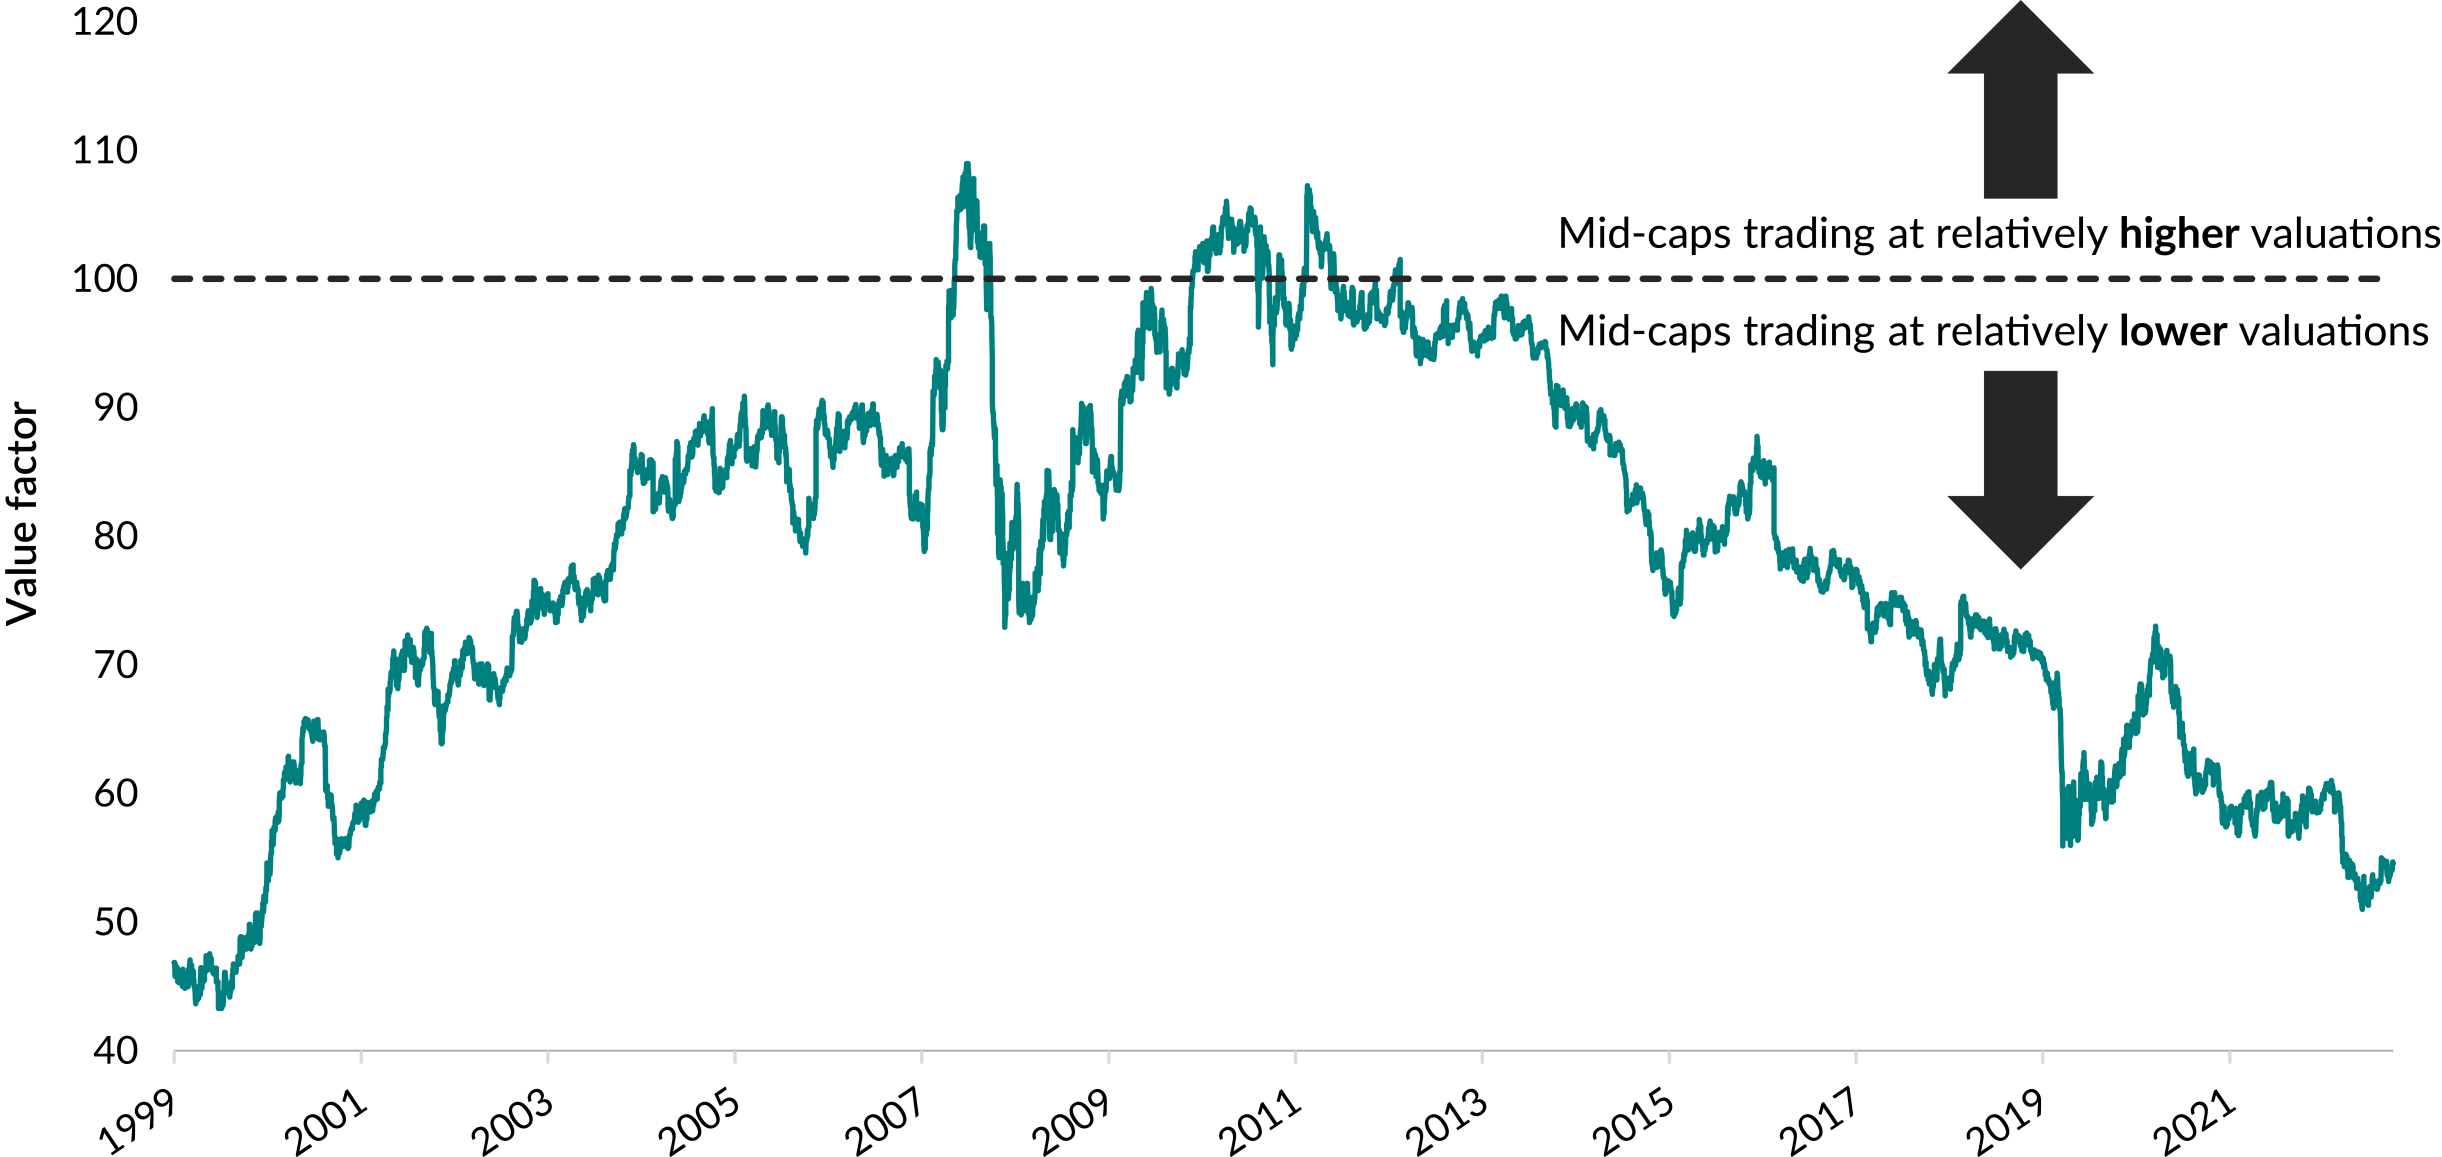 A chart showing the relative valuations of the S&P MidCap 400 Index and the S&P 100 Index between December 31, 1999 to September 30, 2023. Other than a period in 2007 and 2010 to 2011, the midcap index had relatively lower valuations to the large-cap index. At the end of the period, it was almost as low as the start of the period.